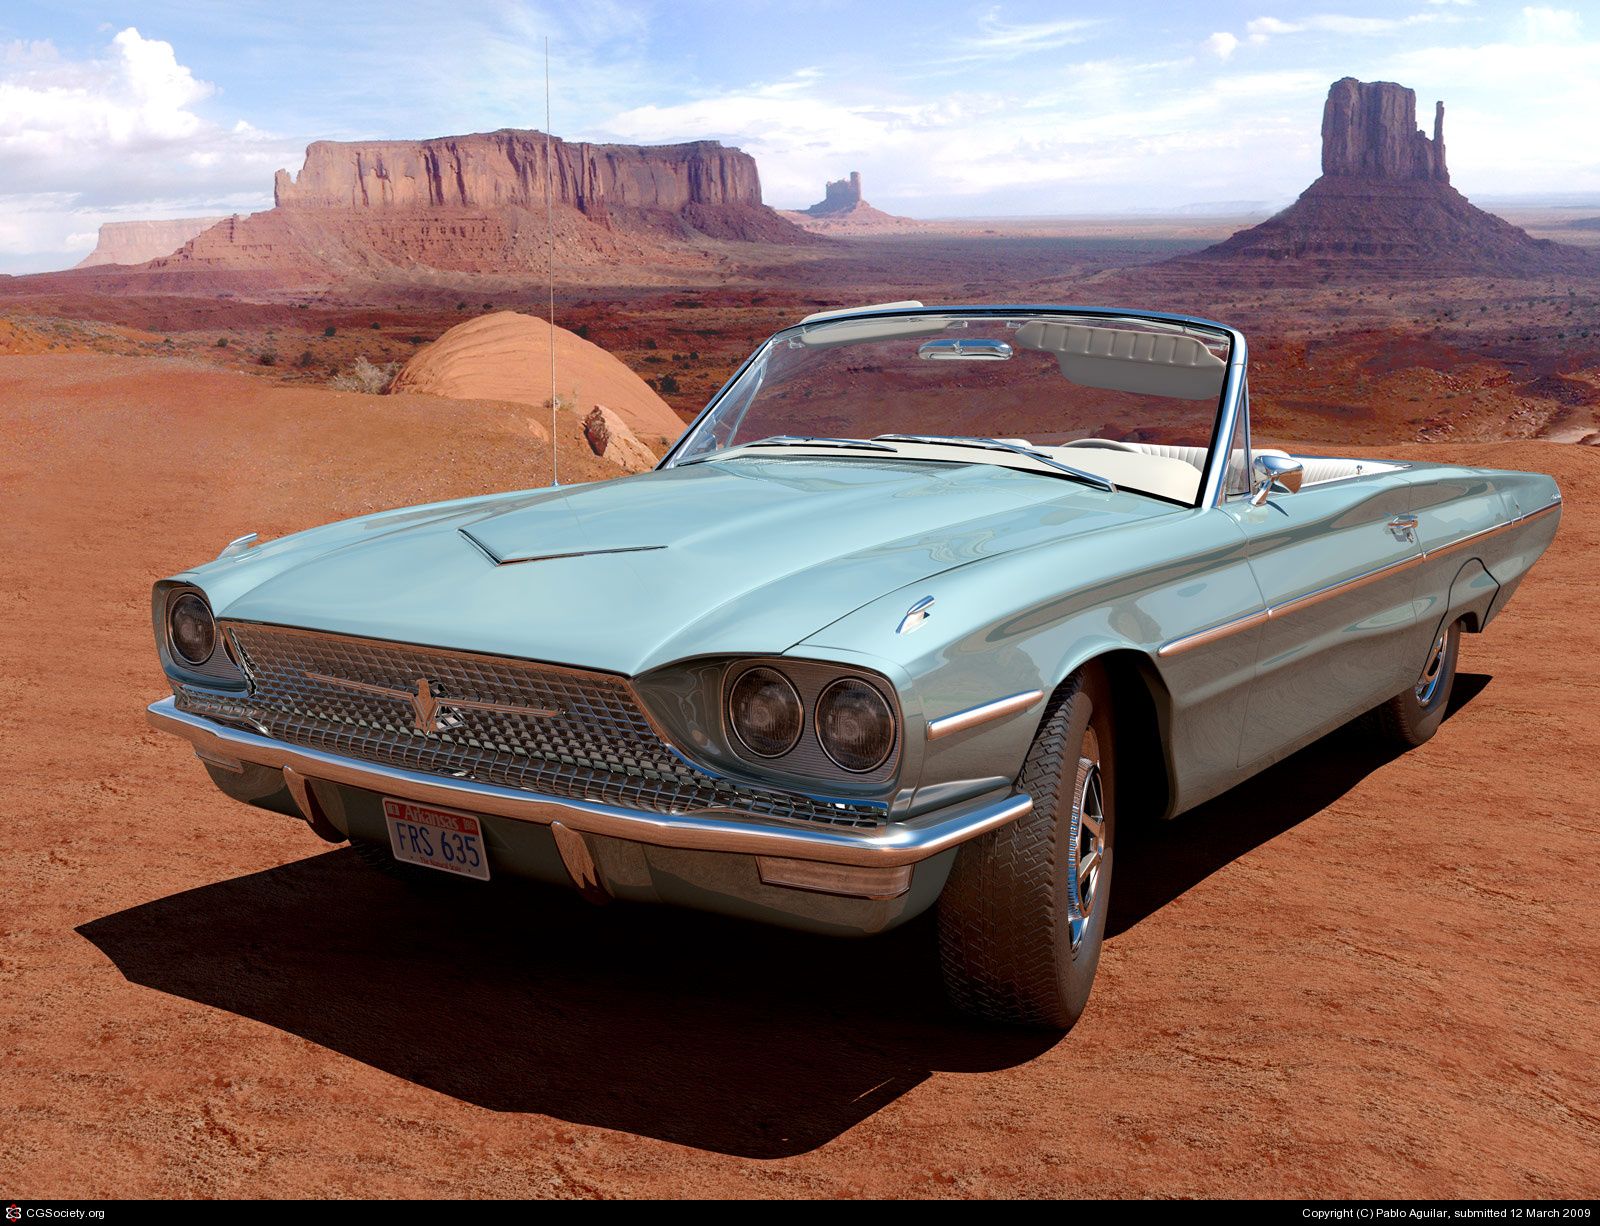 4. Thelma and Louise -- 1966 Ford Thunderbird